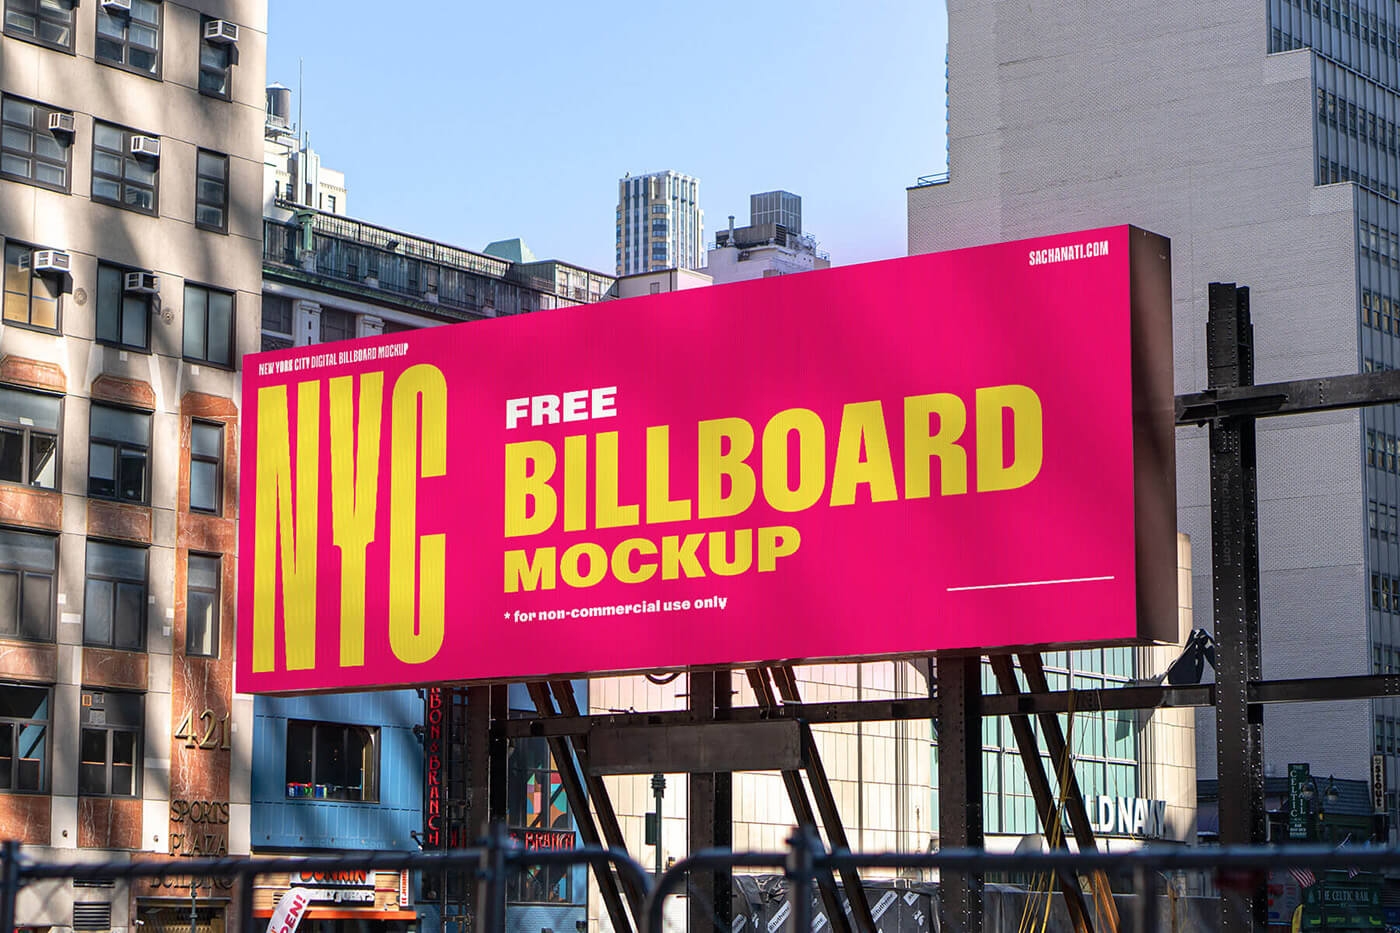 free wide billboard standing in urban city environment with New York City buildings and sky in the background